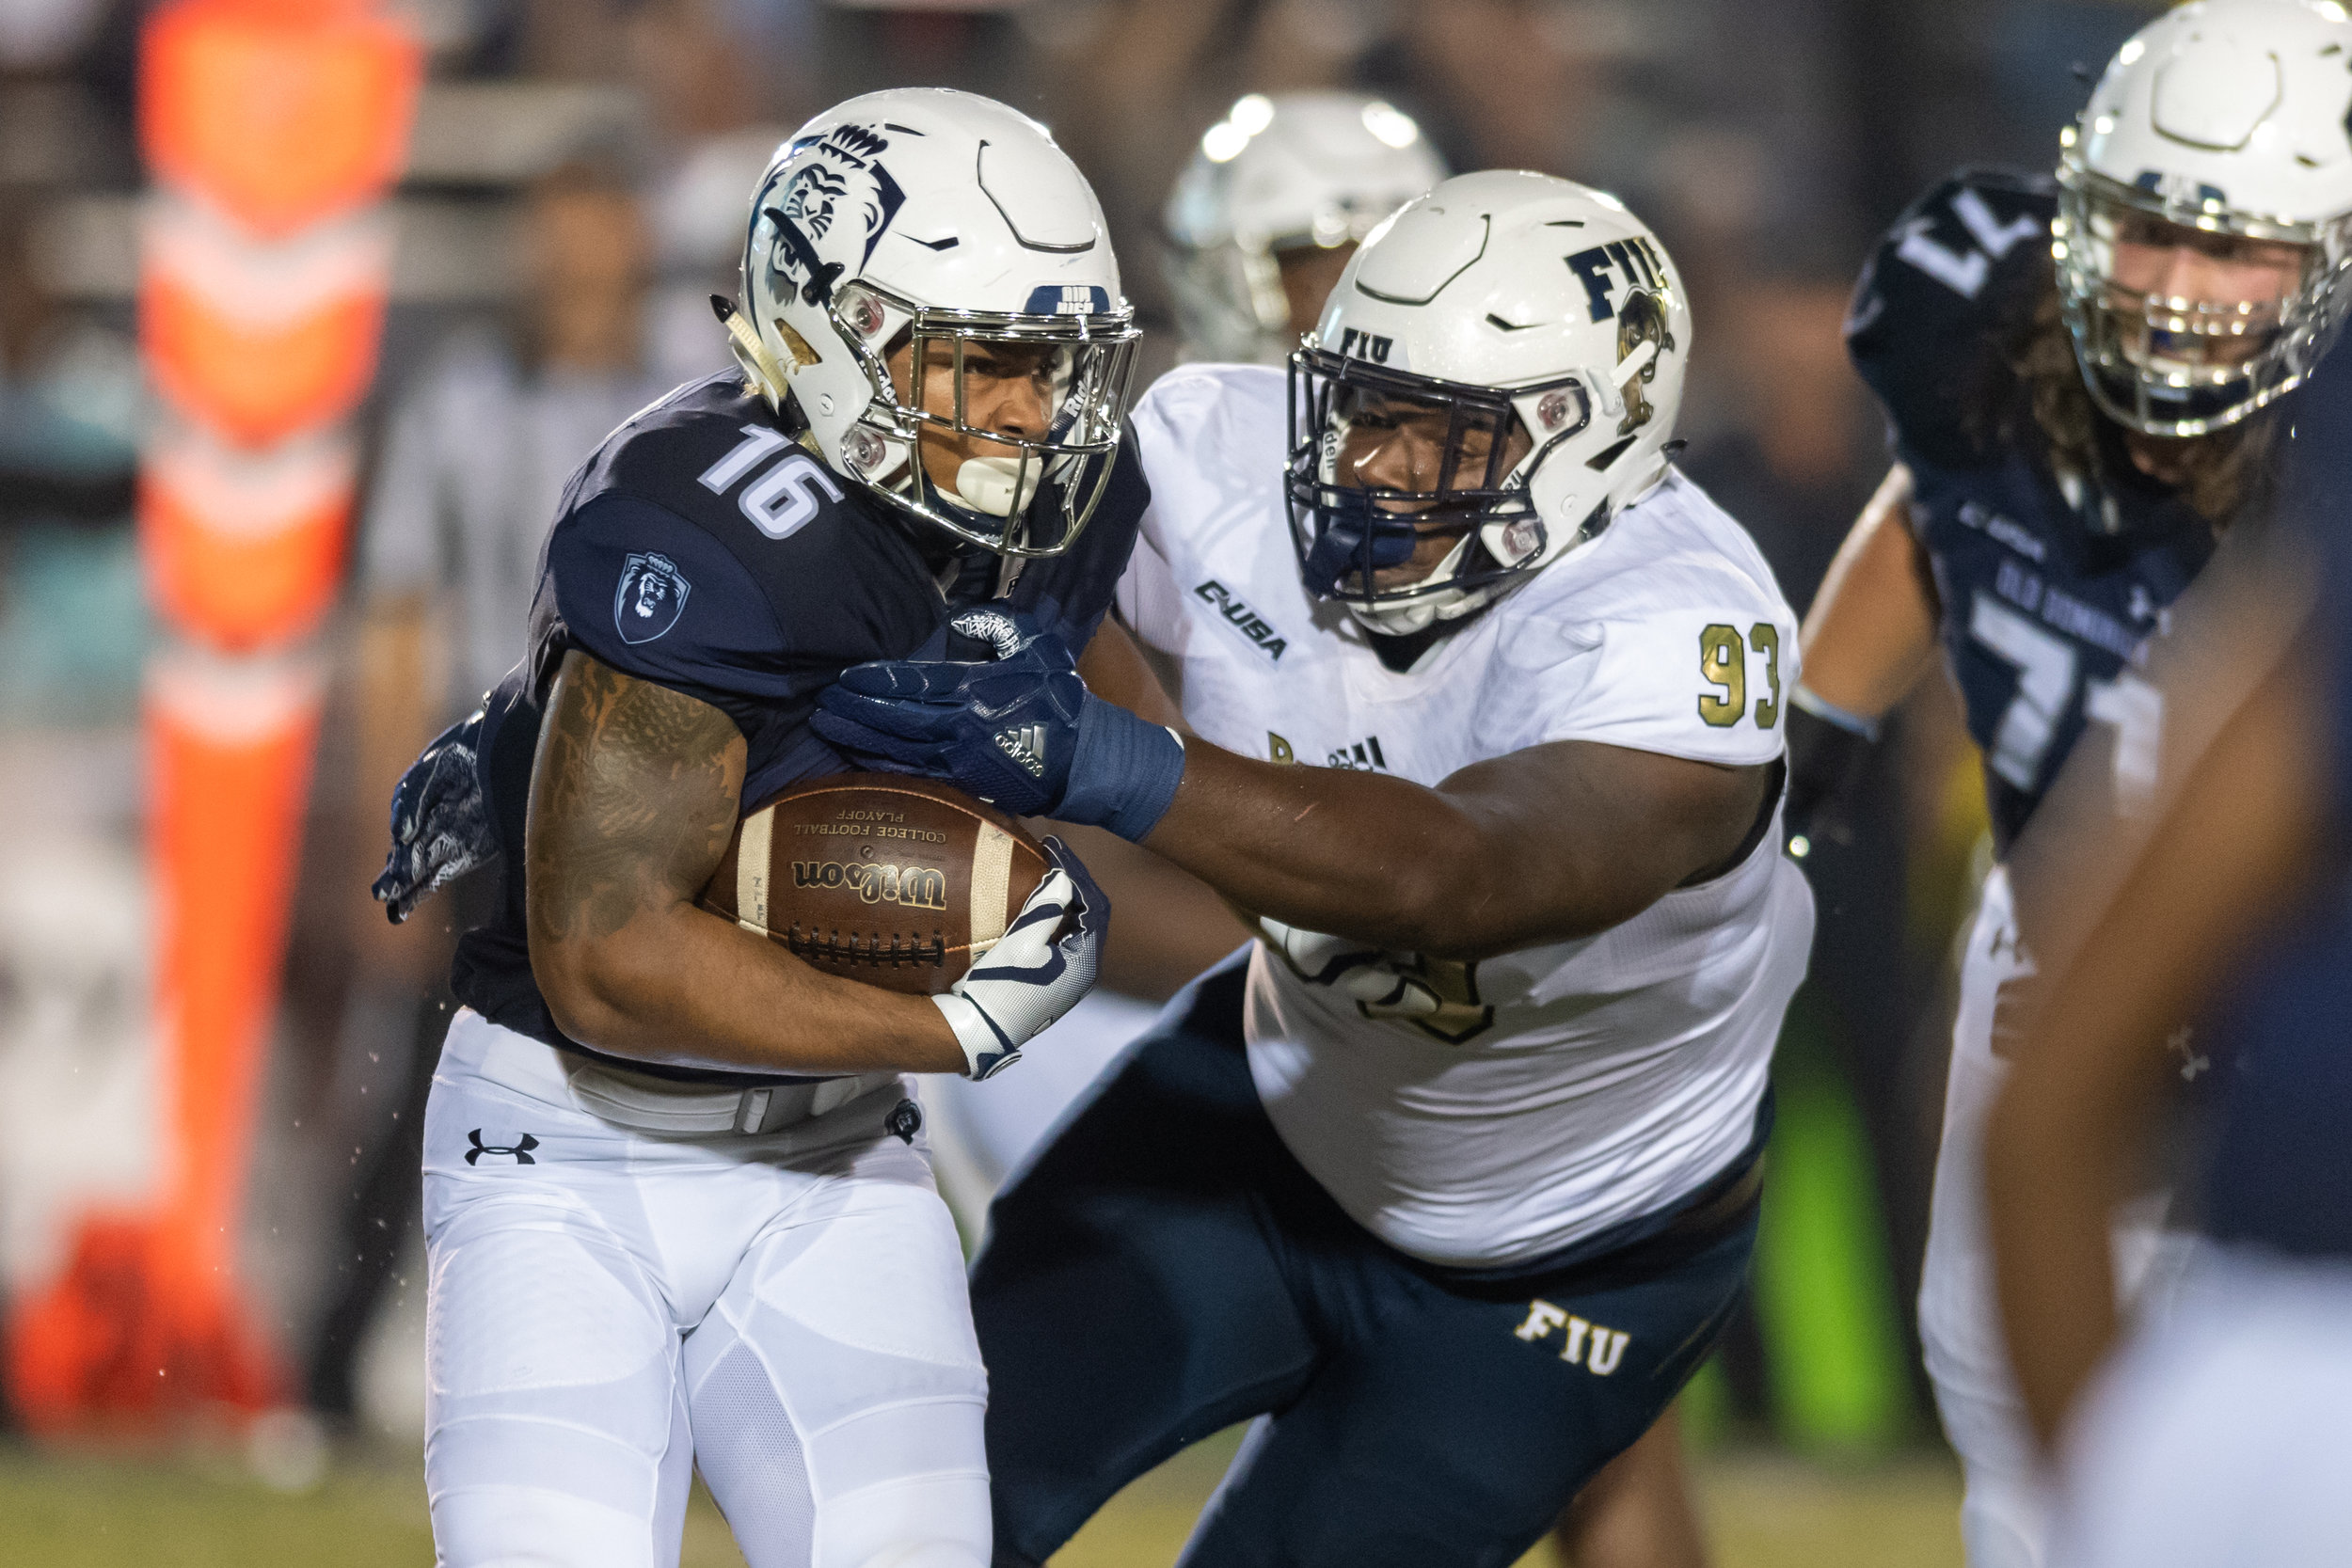  FIU Panthers defensive lineman Teair Tart (93) works to tackle Old Dominion Monarchs running back Brandon Sinclair (16) during the Saturday, Sept. 8, 2018 game held at Old Dominion University in Norfolk, Virginia. The Monarchs lead 14 to 0 during th